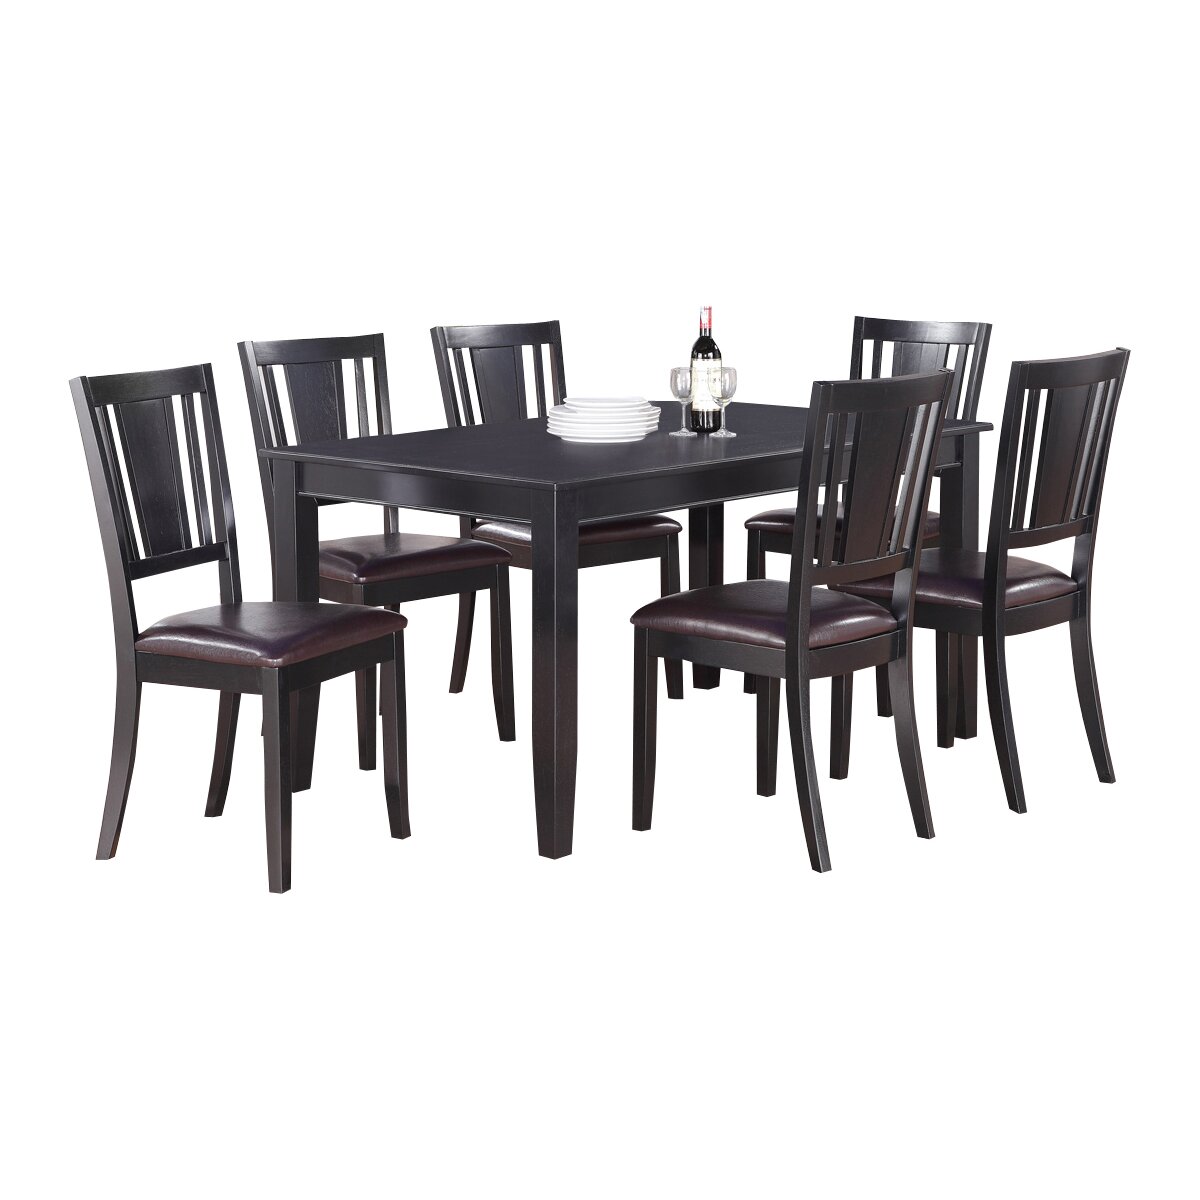 Wooden Importers Dudley 6 Piece Dining Set &amp; Reviews | Wayfair